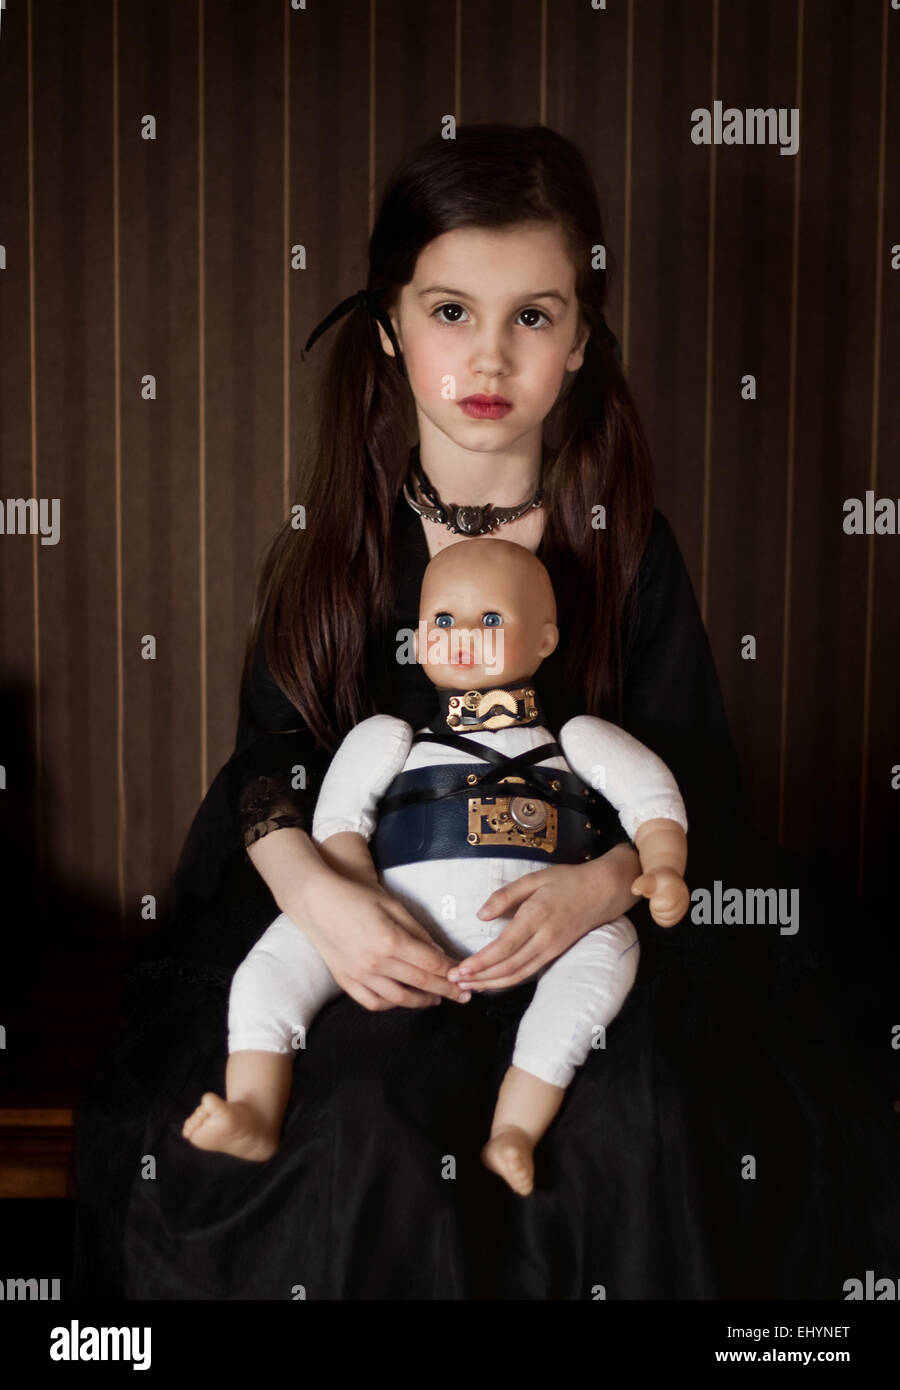 Girl sitting with a doll with steampunk accessories Stock Photo